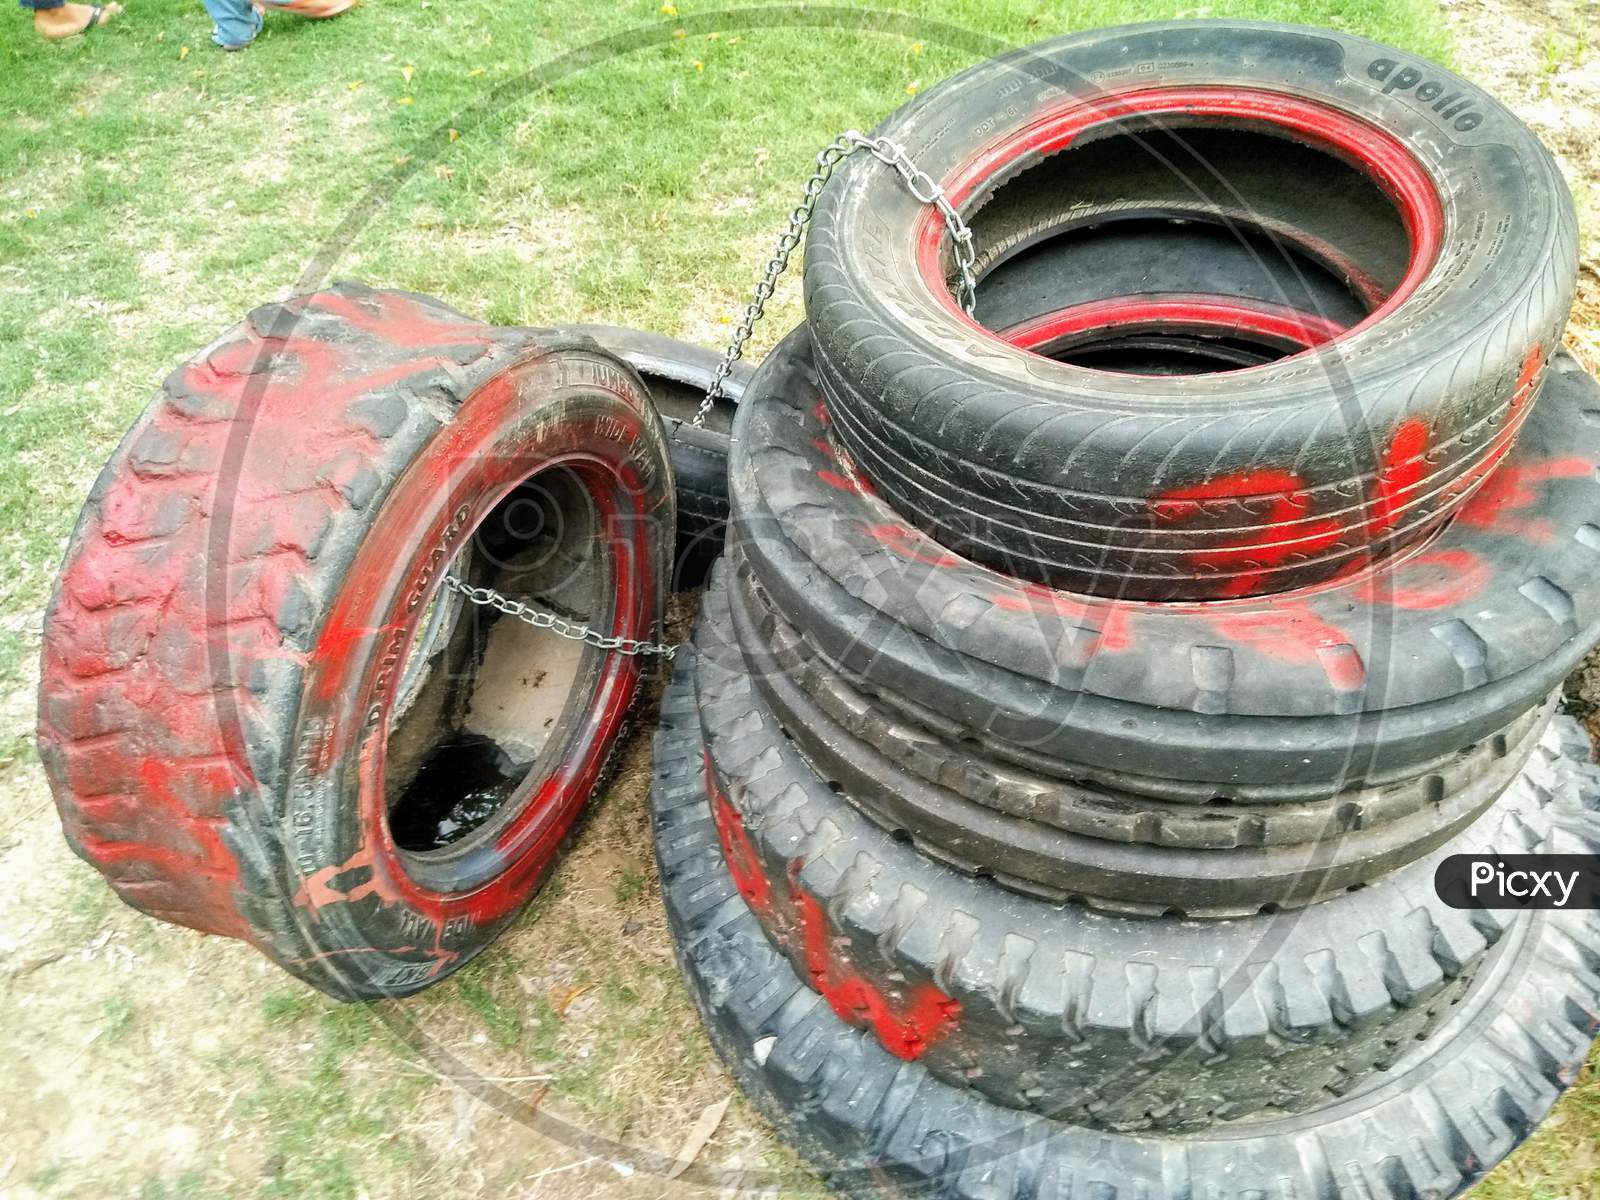 Reuse Of Old Vehicle Tyres In a Park